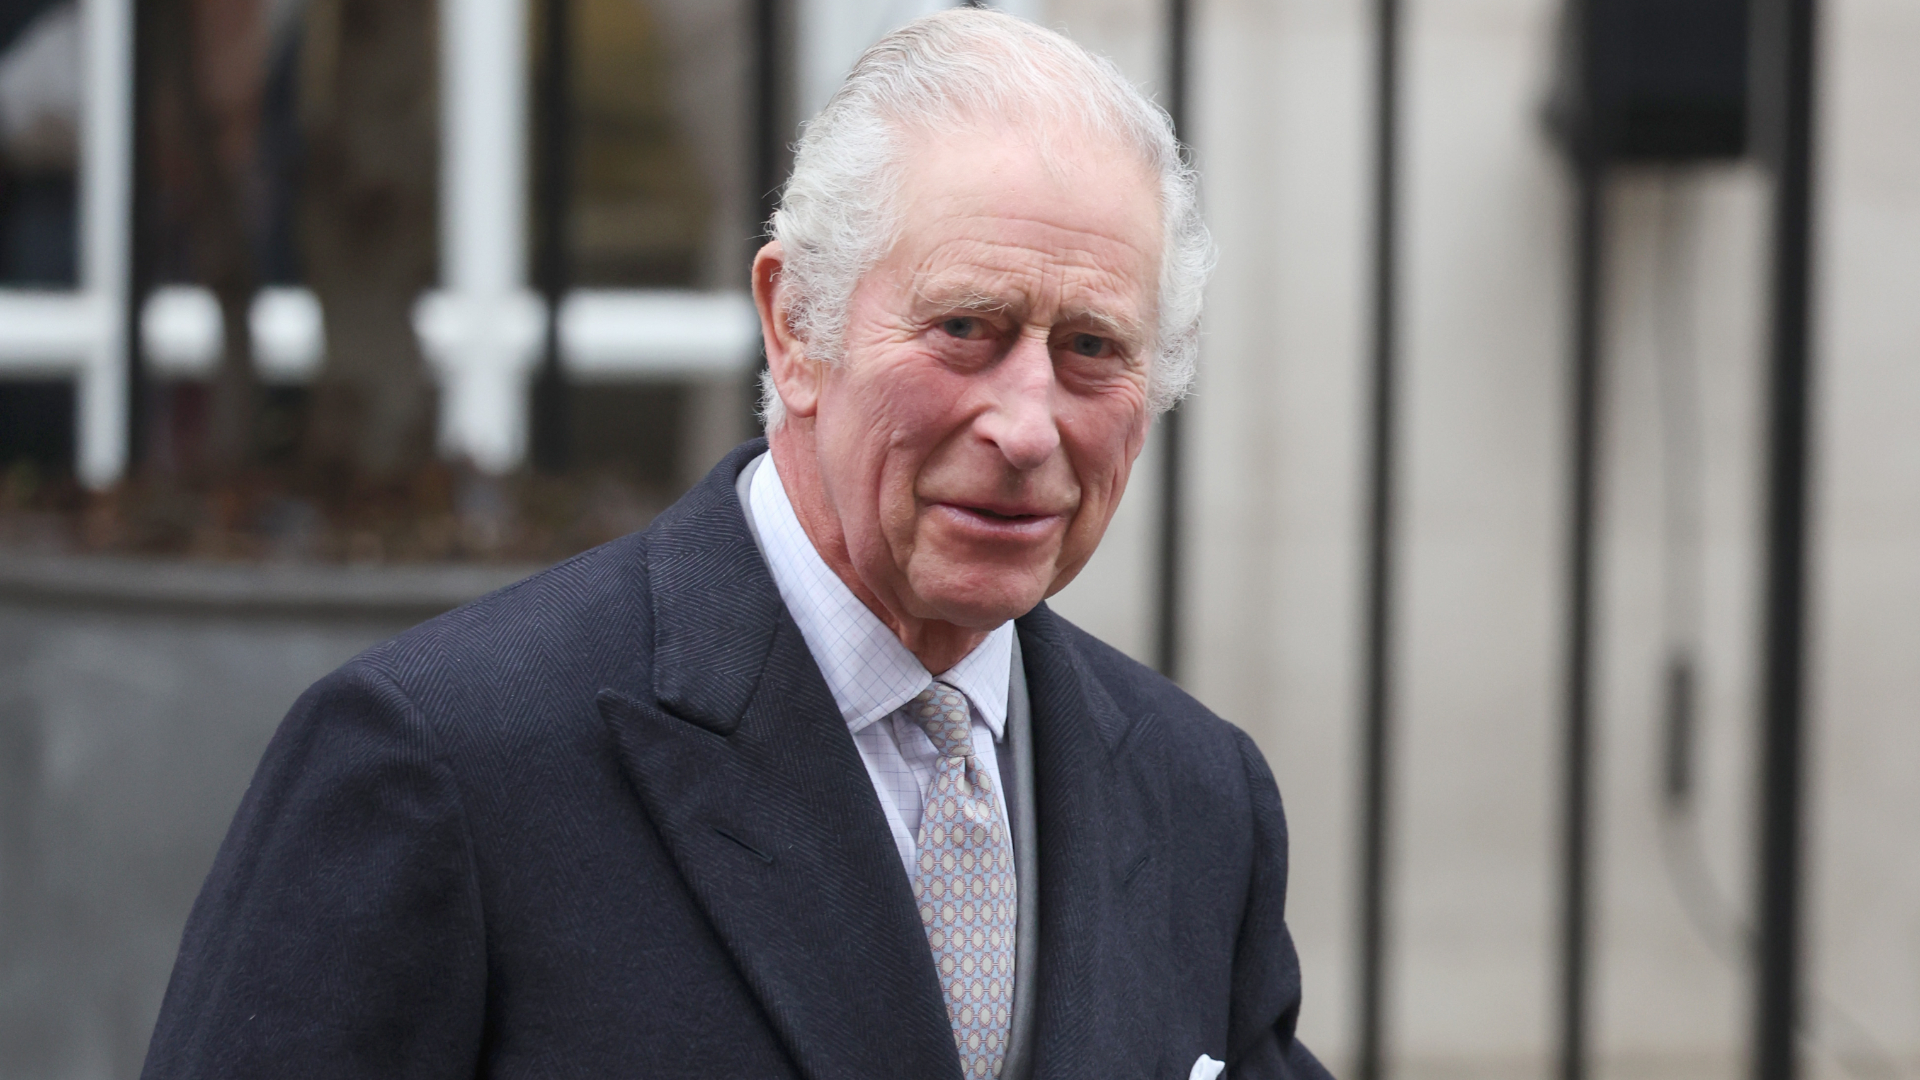 The journalist says that King Charles III does not believe in chemotherapy and wants to treat cancer with “doses.”